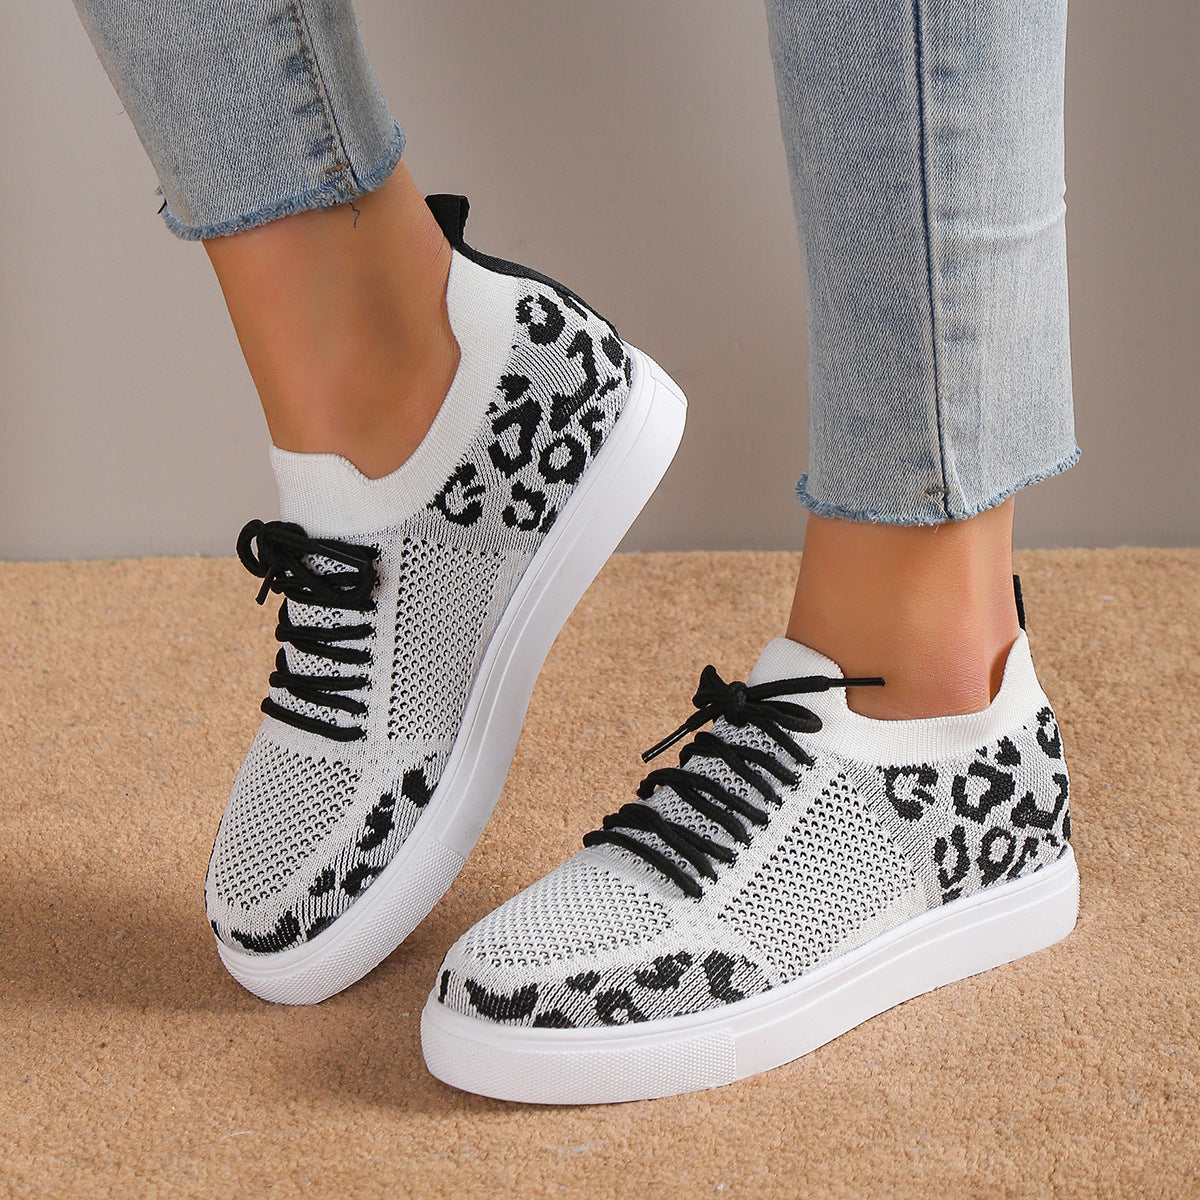 PREORDER- Lace-Up Leopard Flat Sneakers